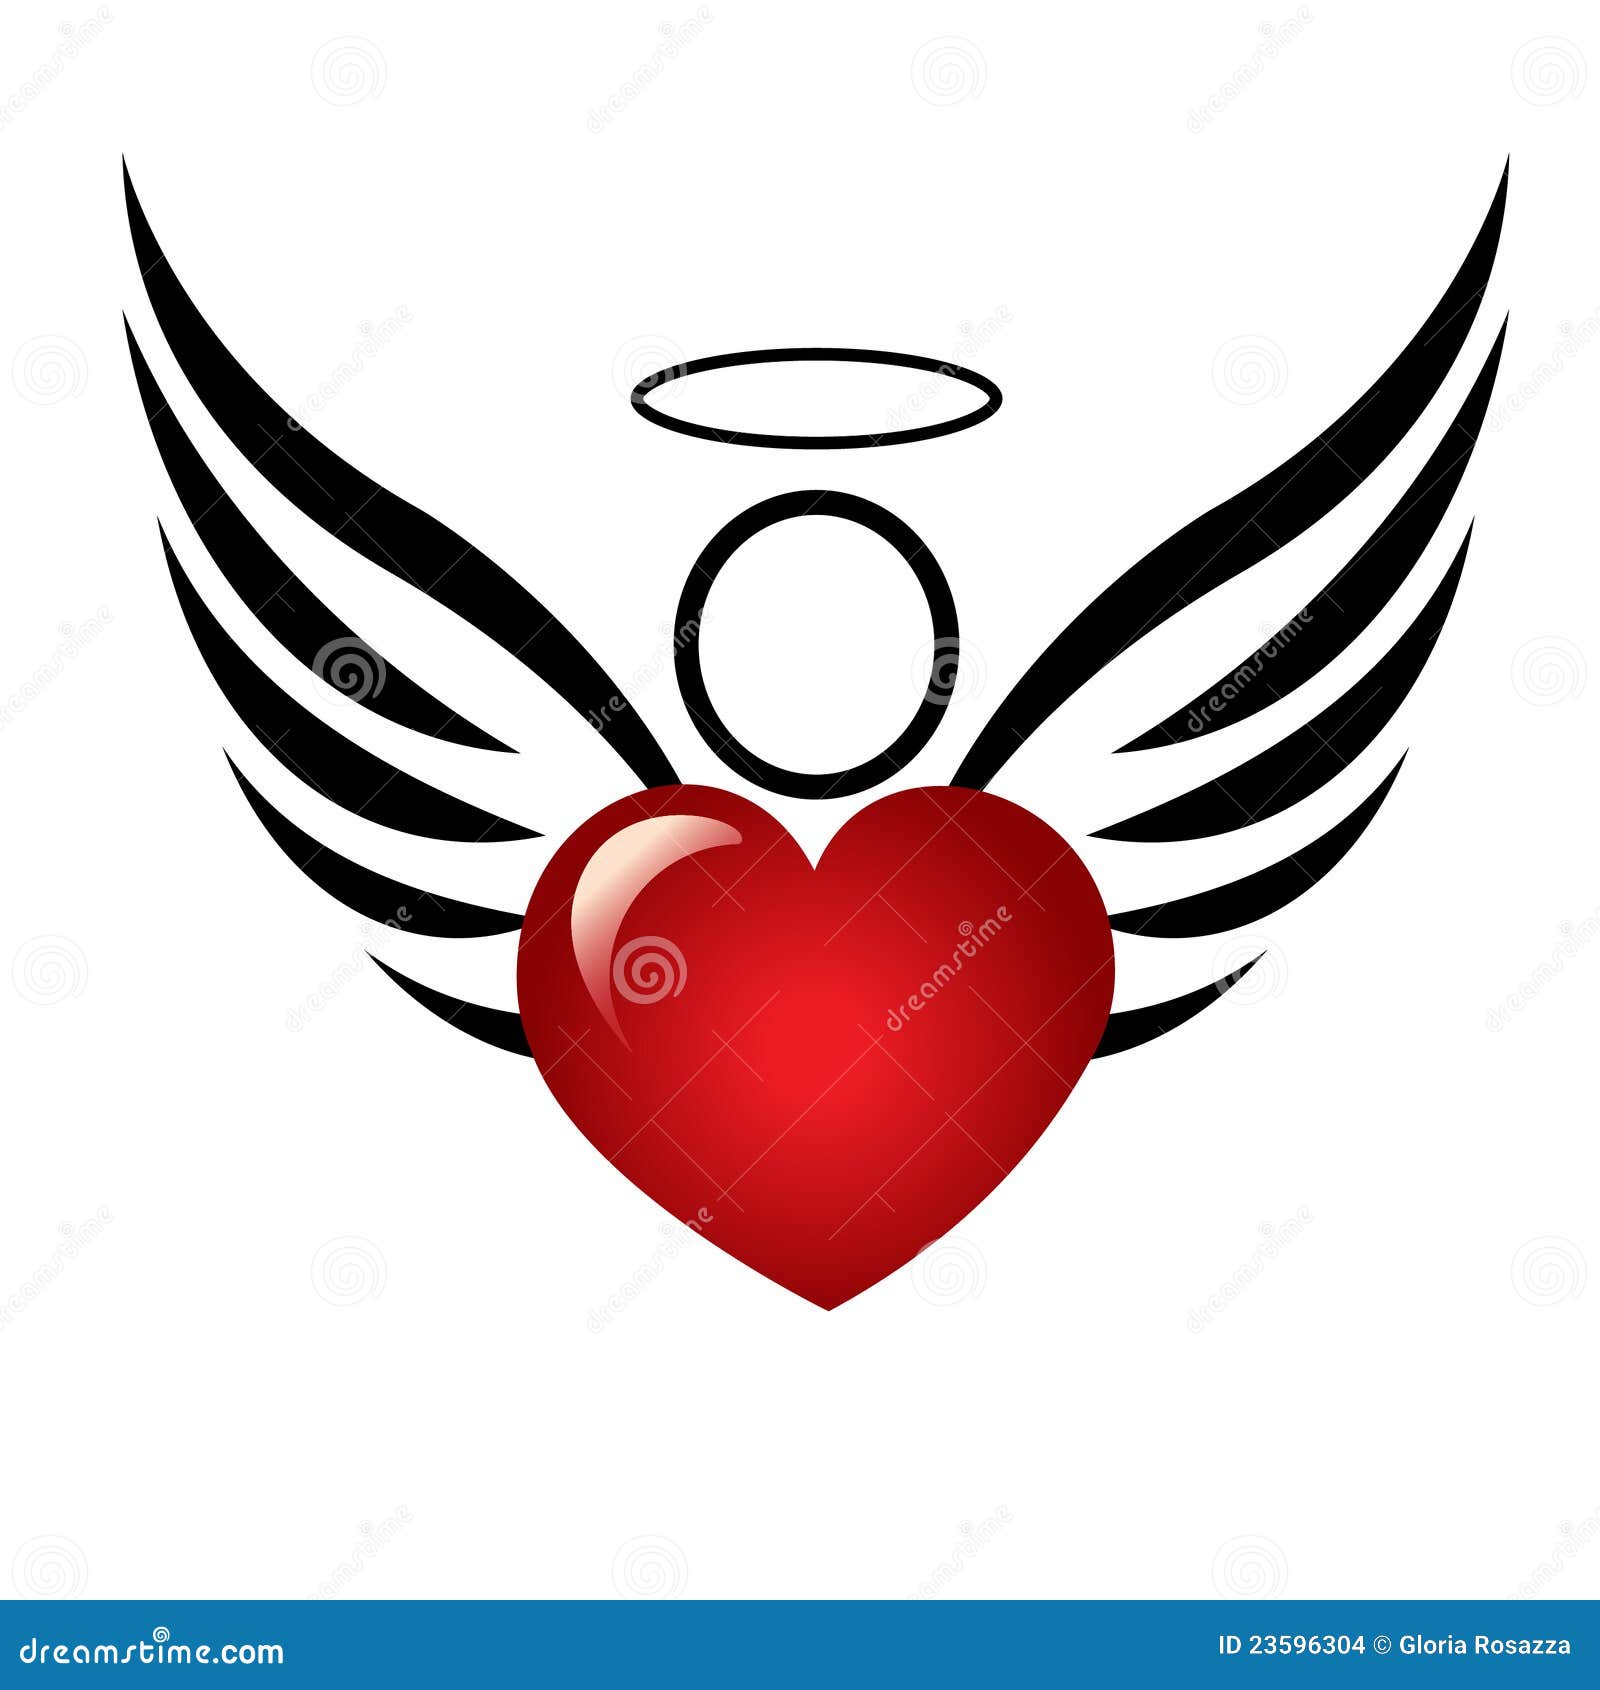 Angel With Heart Logo Stock Images - Image: 23596304